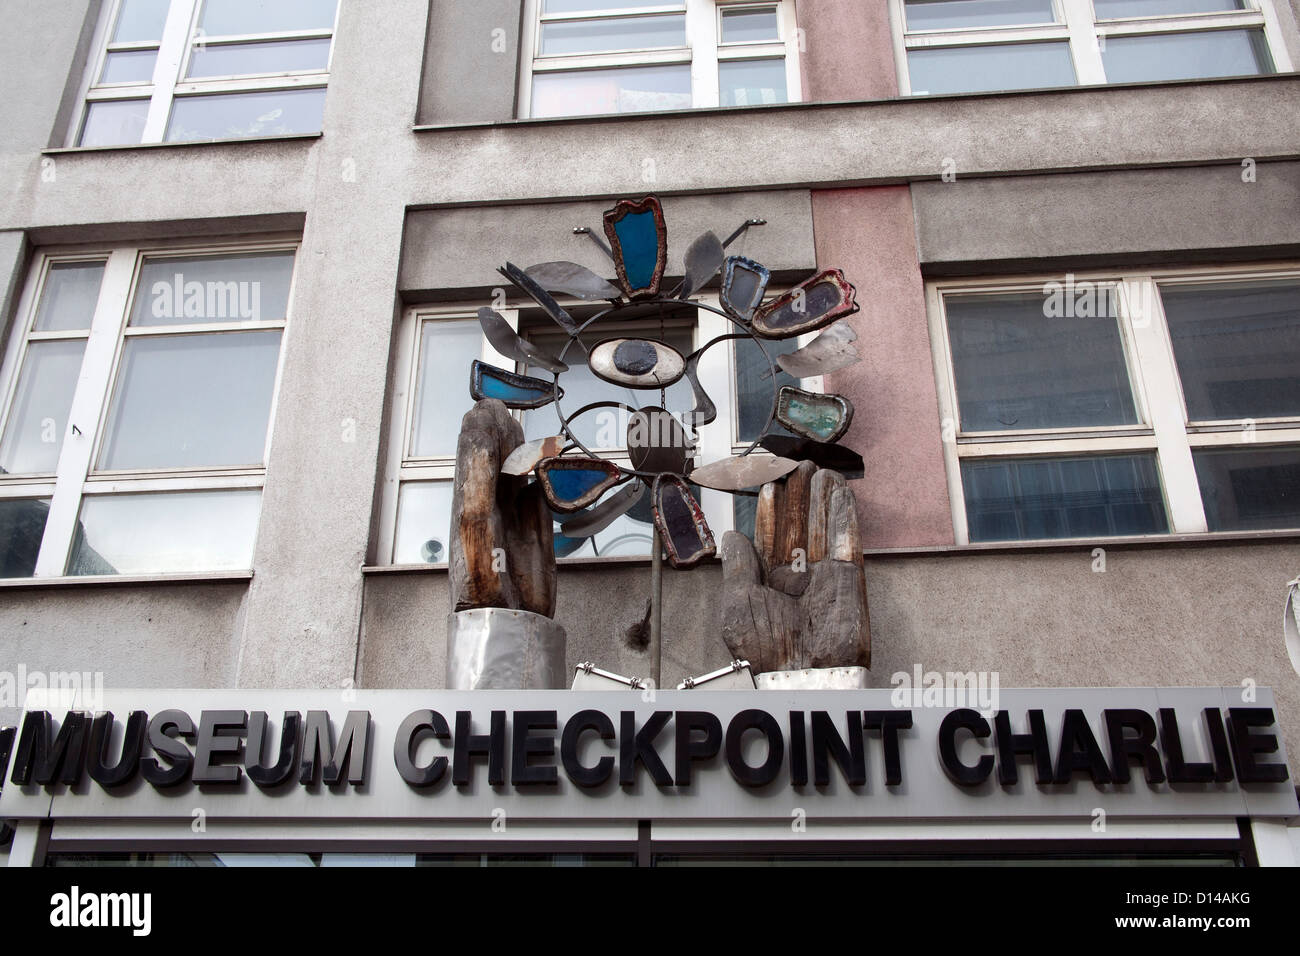 Museum Checkpoint Charlie - Mauermuseum -  Berlin Germany Stock Photo